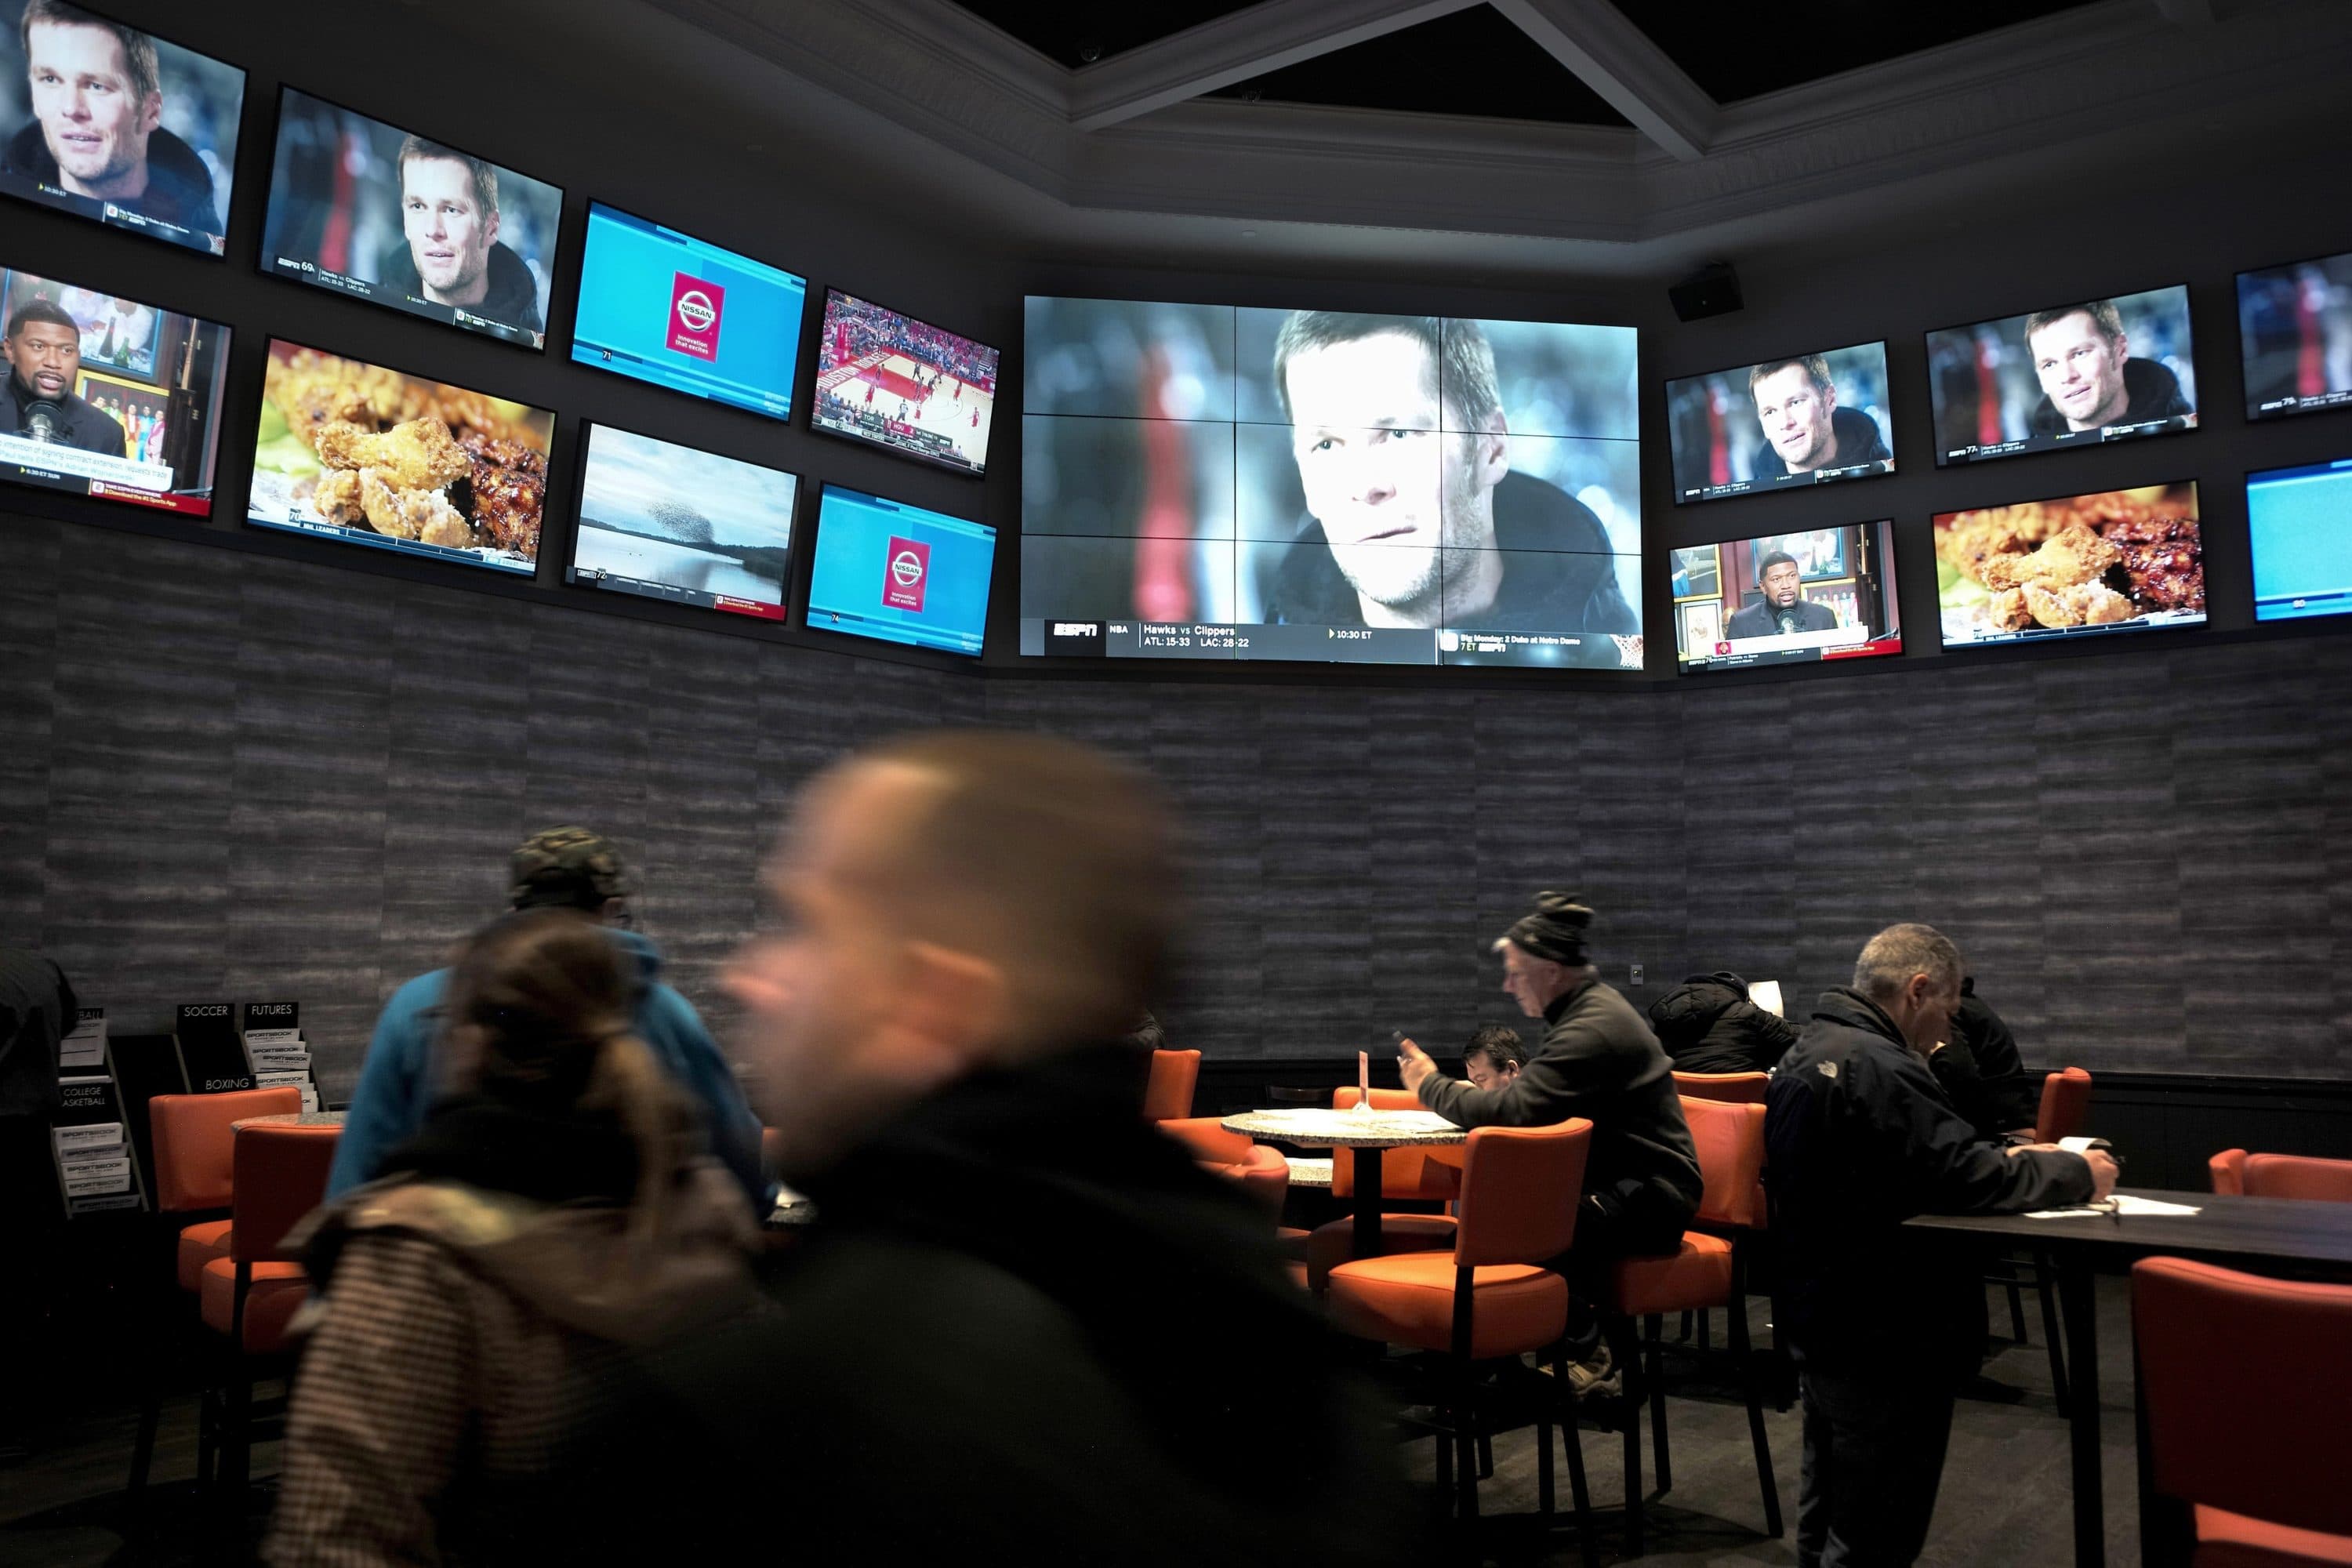 Patrons visit the sports betting area of Twin River Casino in Lincoln, Rhode Island. (Steven Senne/AP)